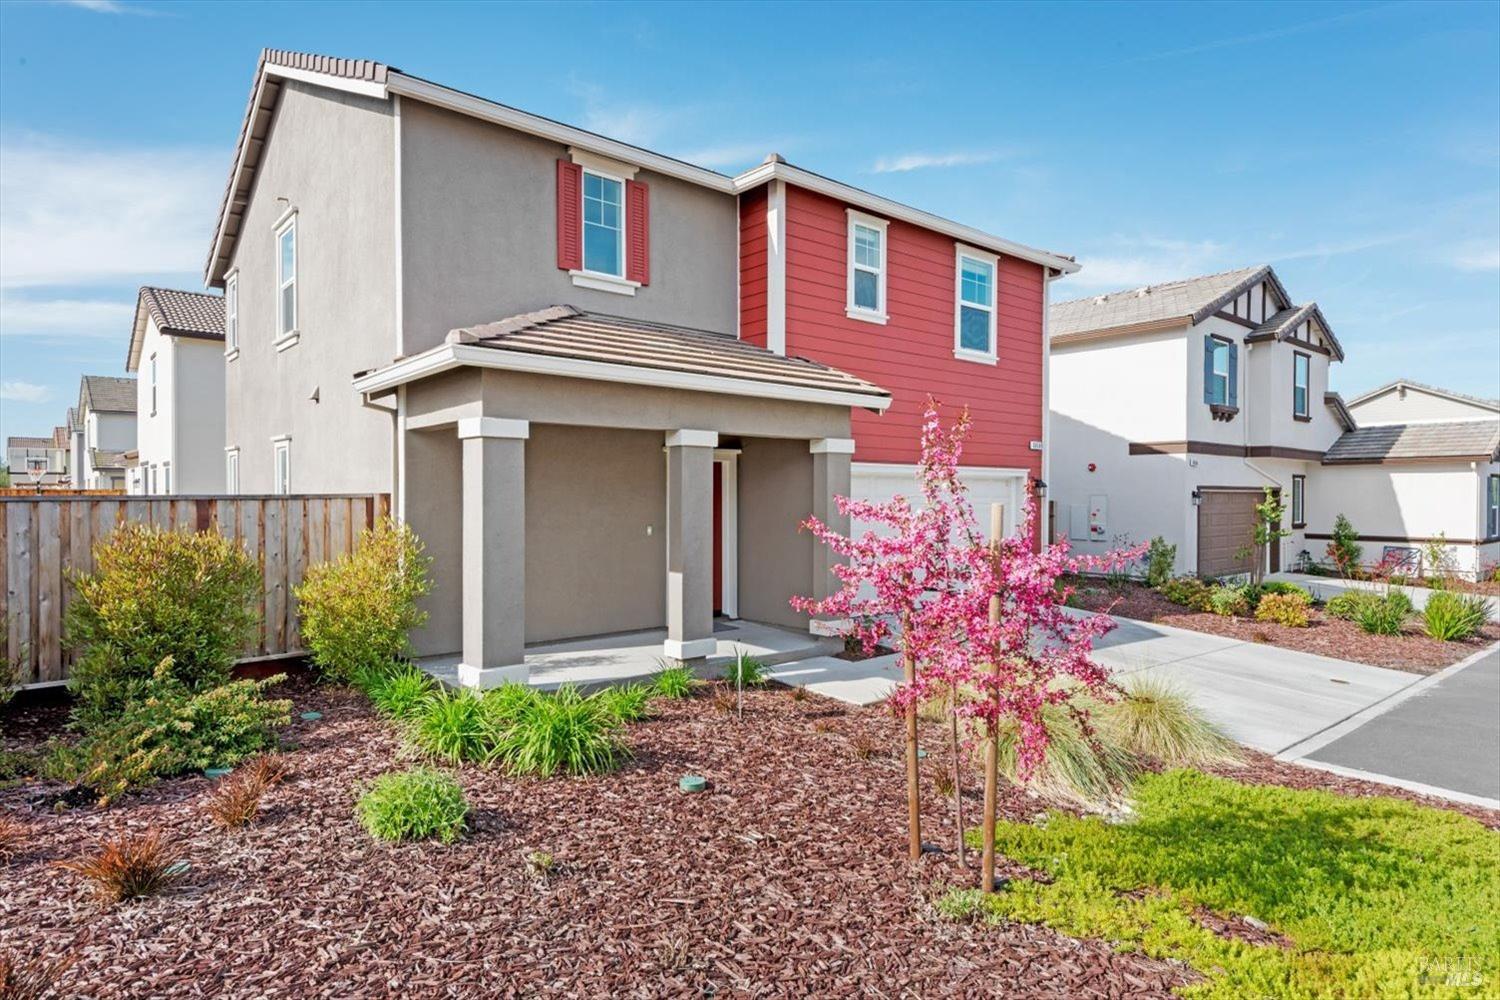 Photo of 6050 Oxford Pl in Rohnert Park, CA